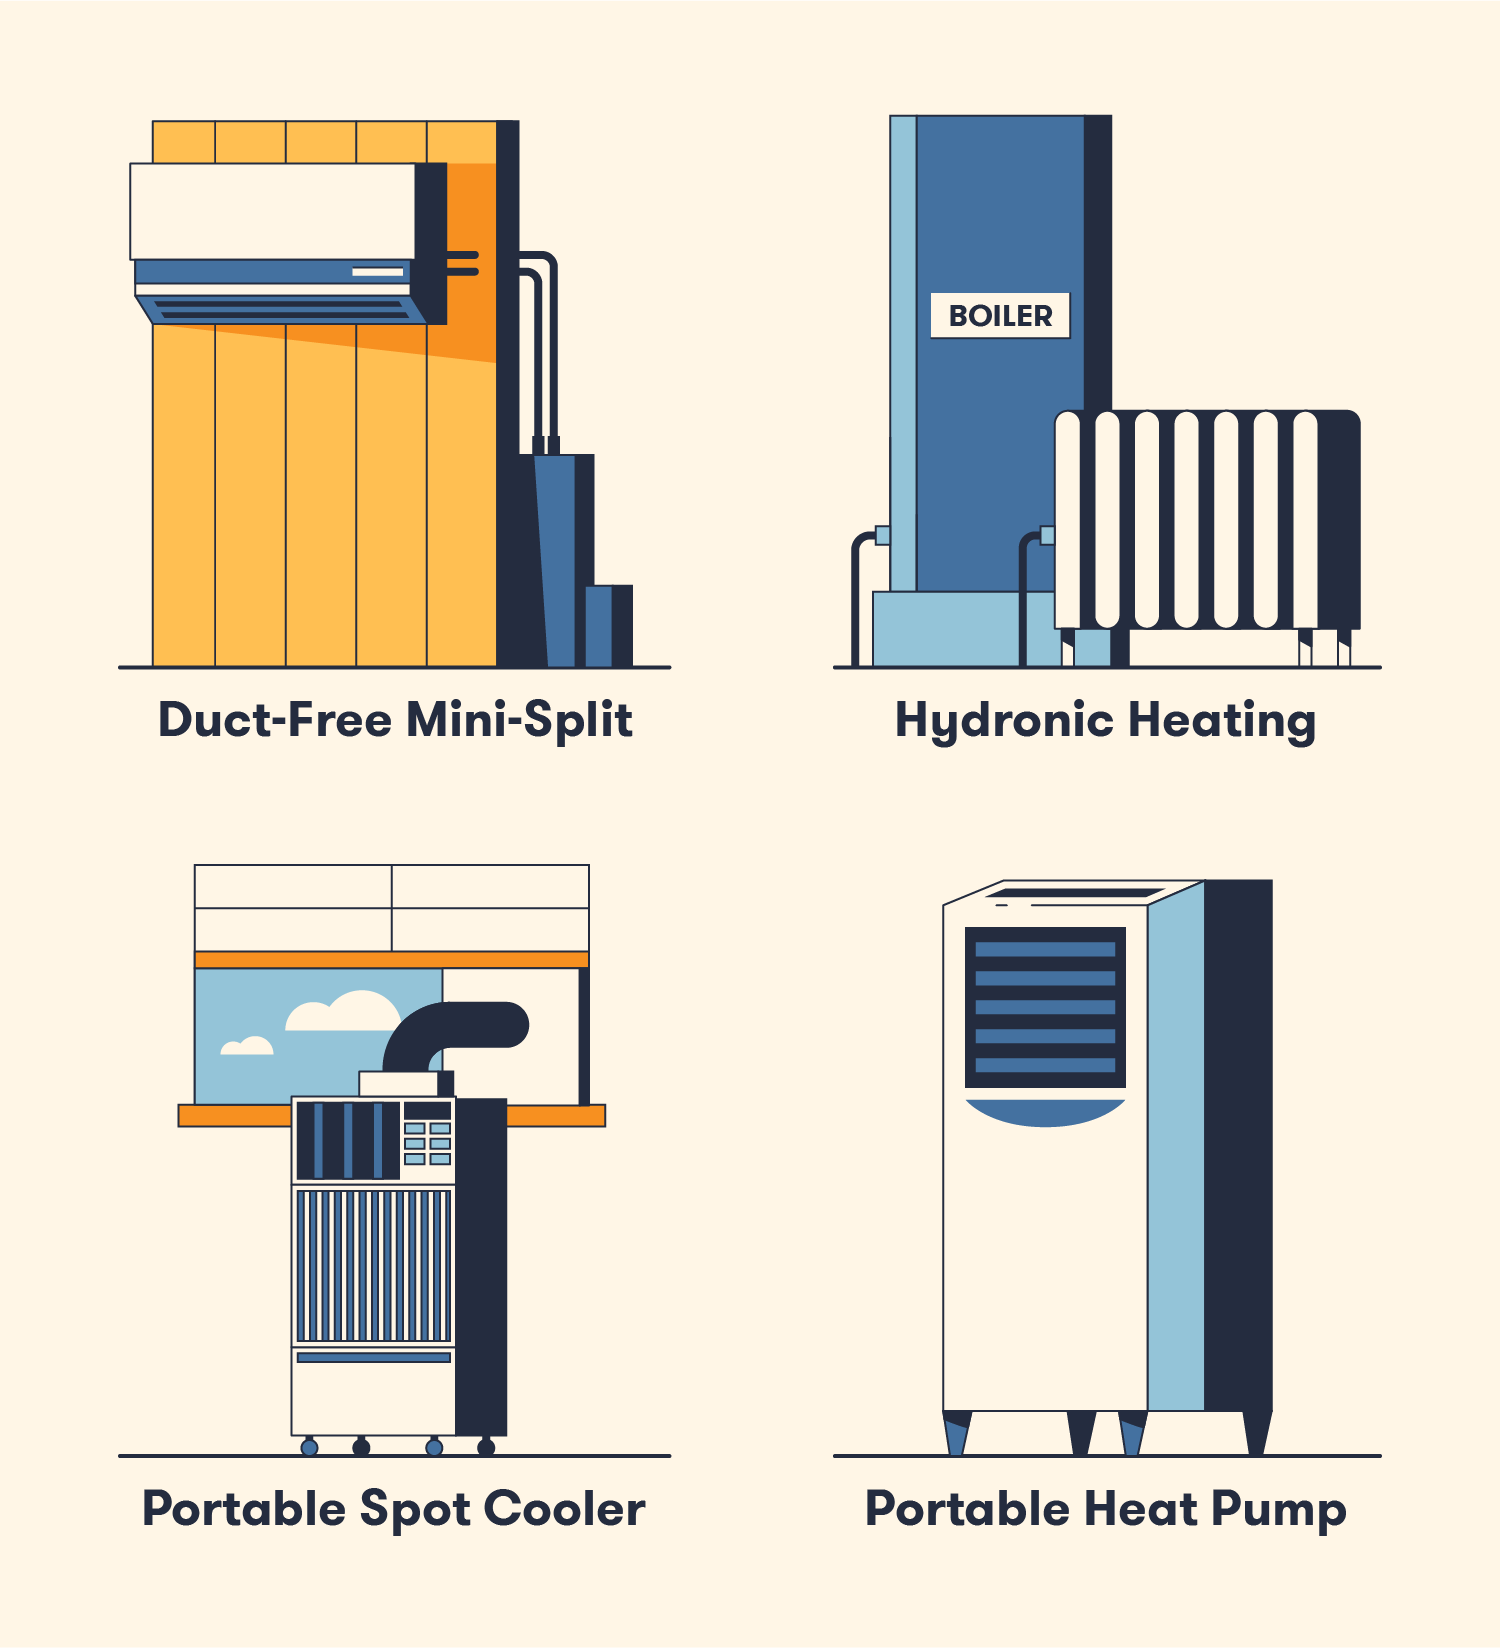 Different Types of HVAC Systems